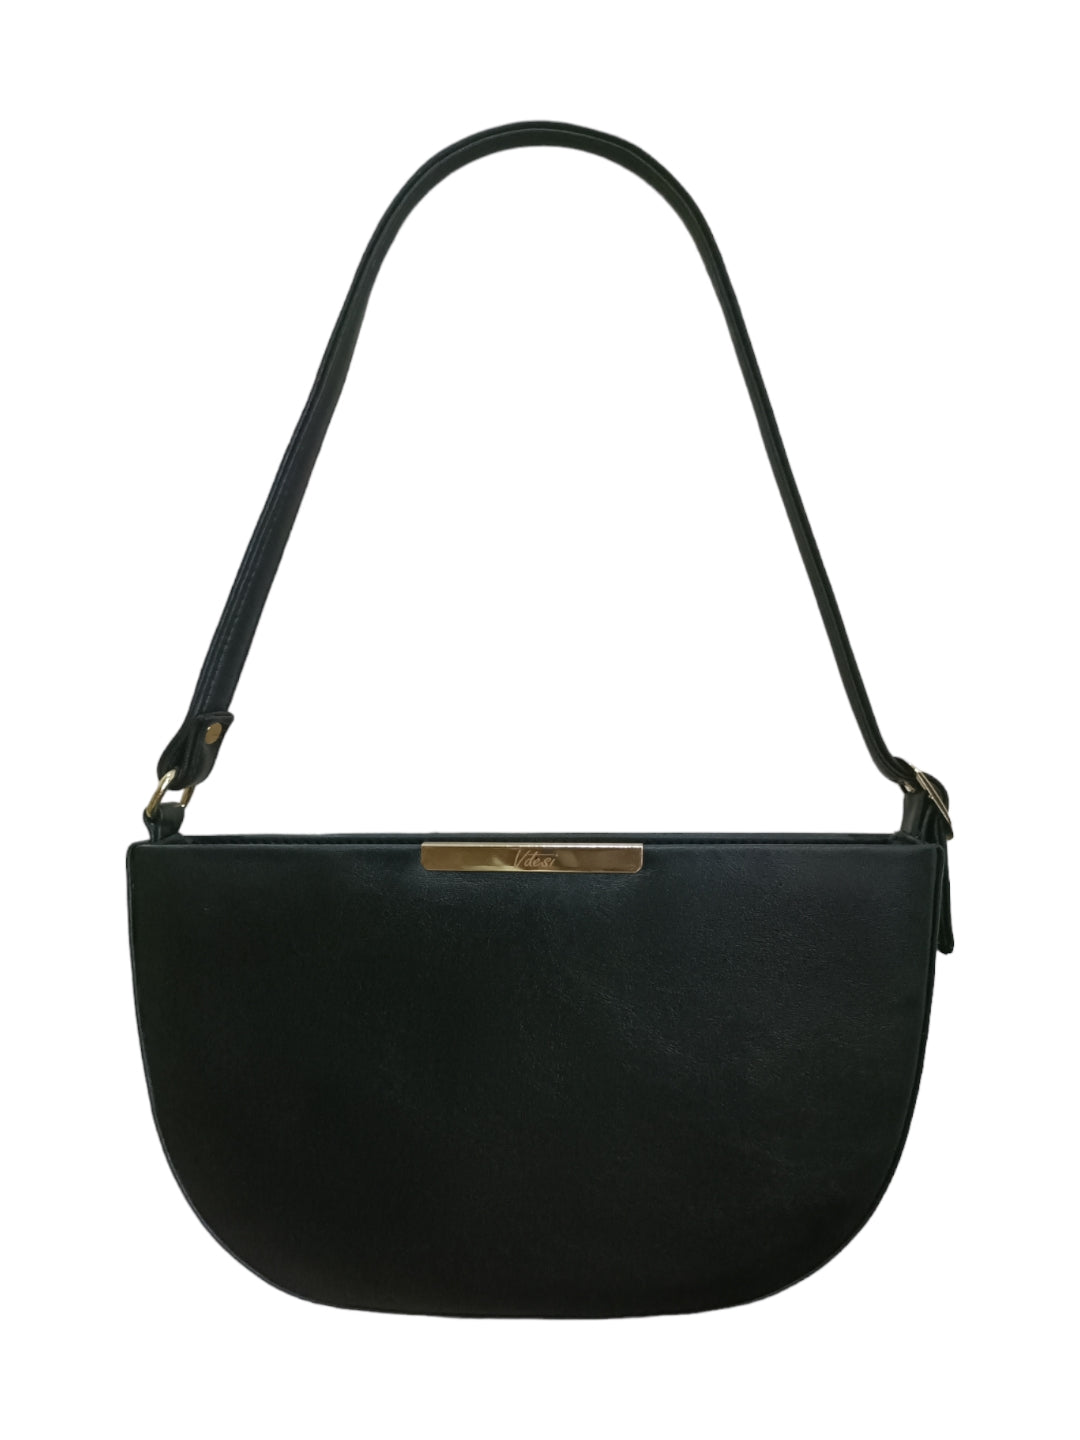 Elevate your ensemble with our stylish ladies' shoulder bag.